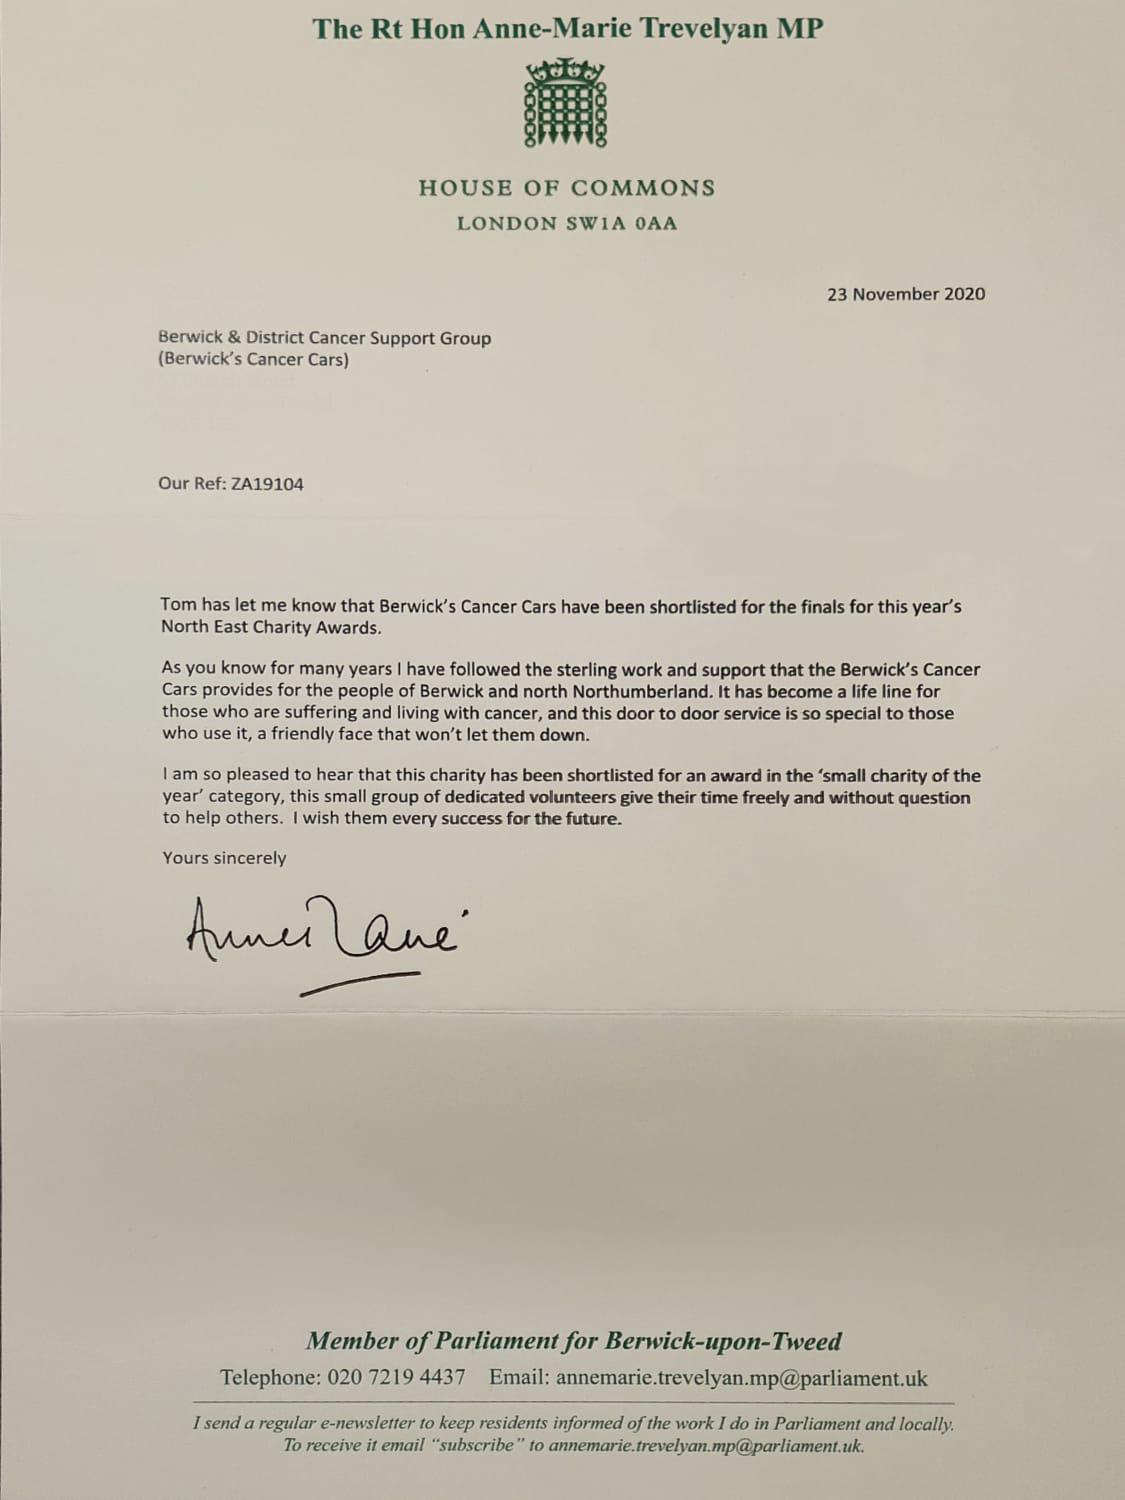 Letter of support from Anne-Marie Trevelyan MP for Berwick-upon-Tweed